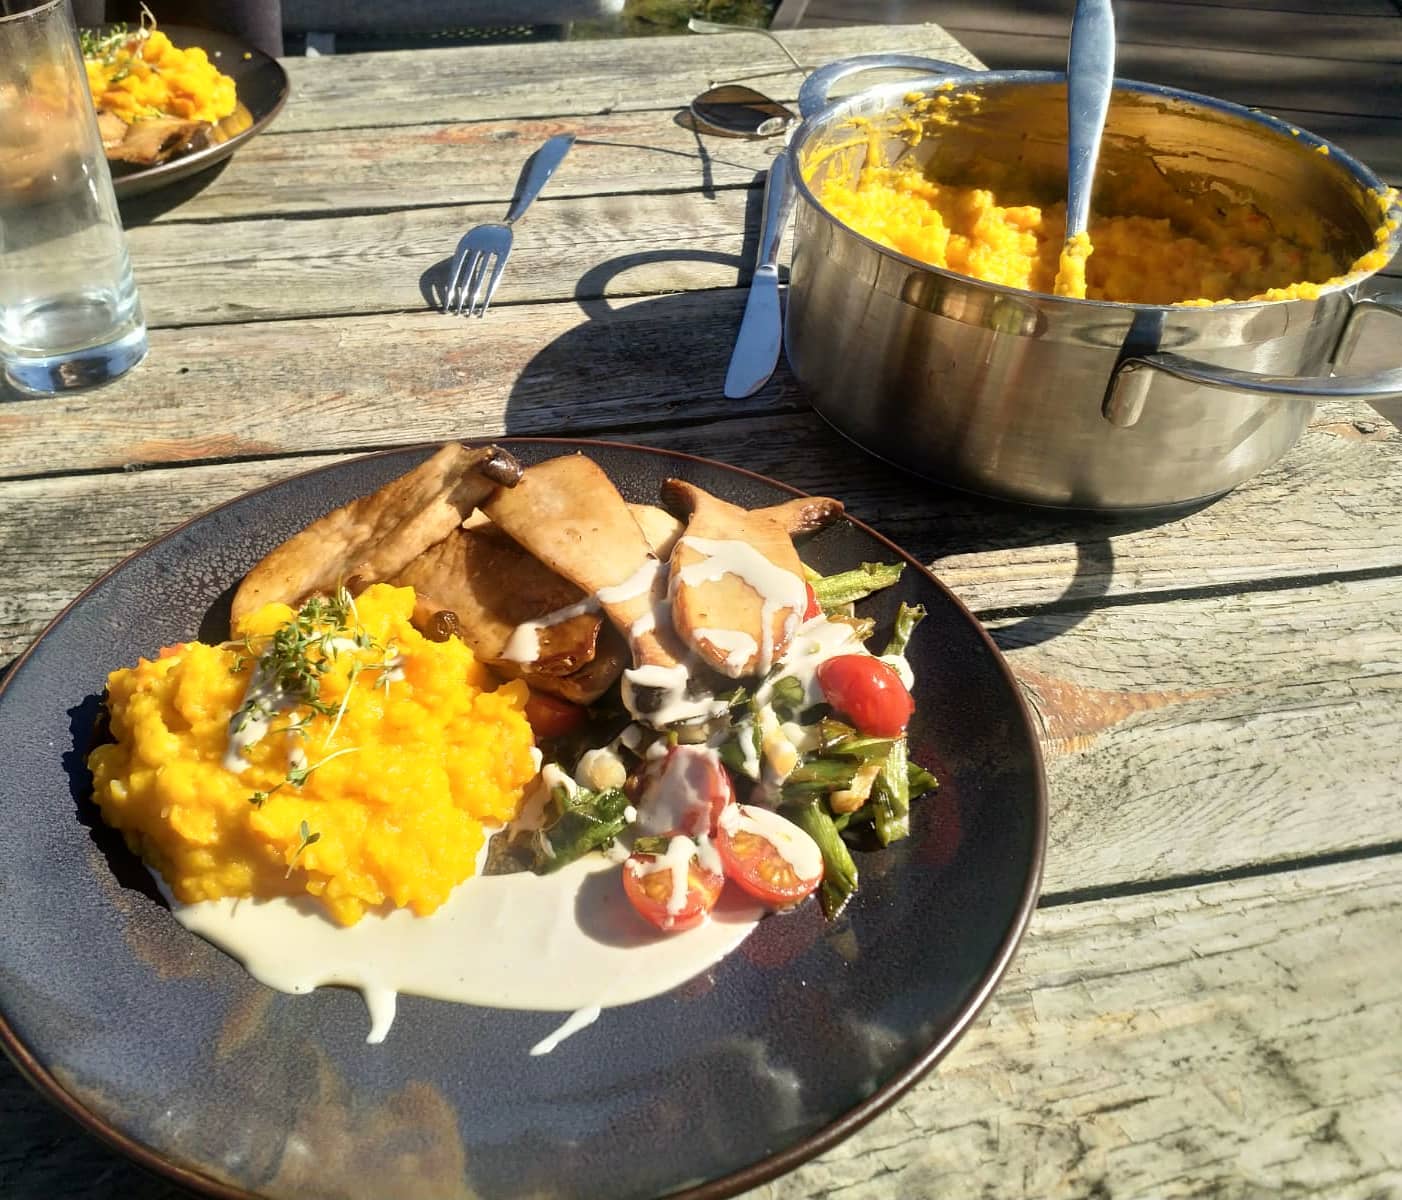 The wonderful sunny weather finally allows to work & eat outside again. A really nice start into spring and the luxury of our home makes it a lot easier for us then for many other to #stayAtHome

Todays quick, but delicious #vegan lunch